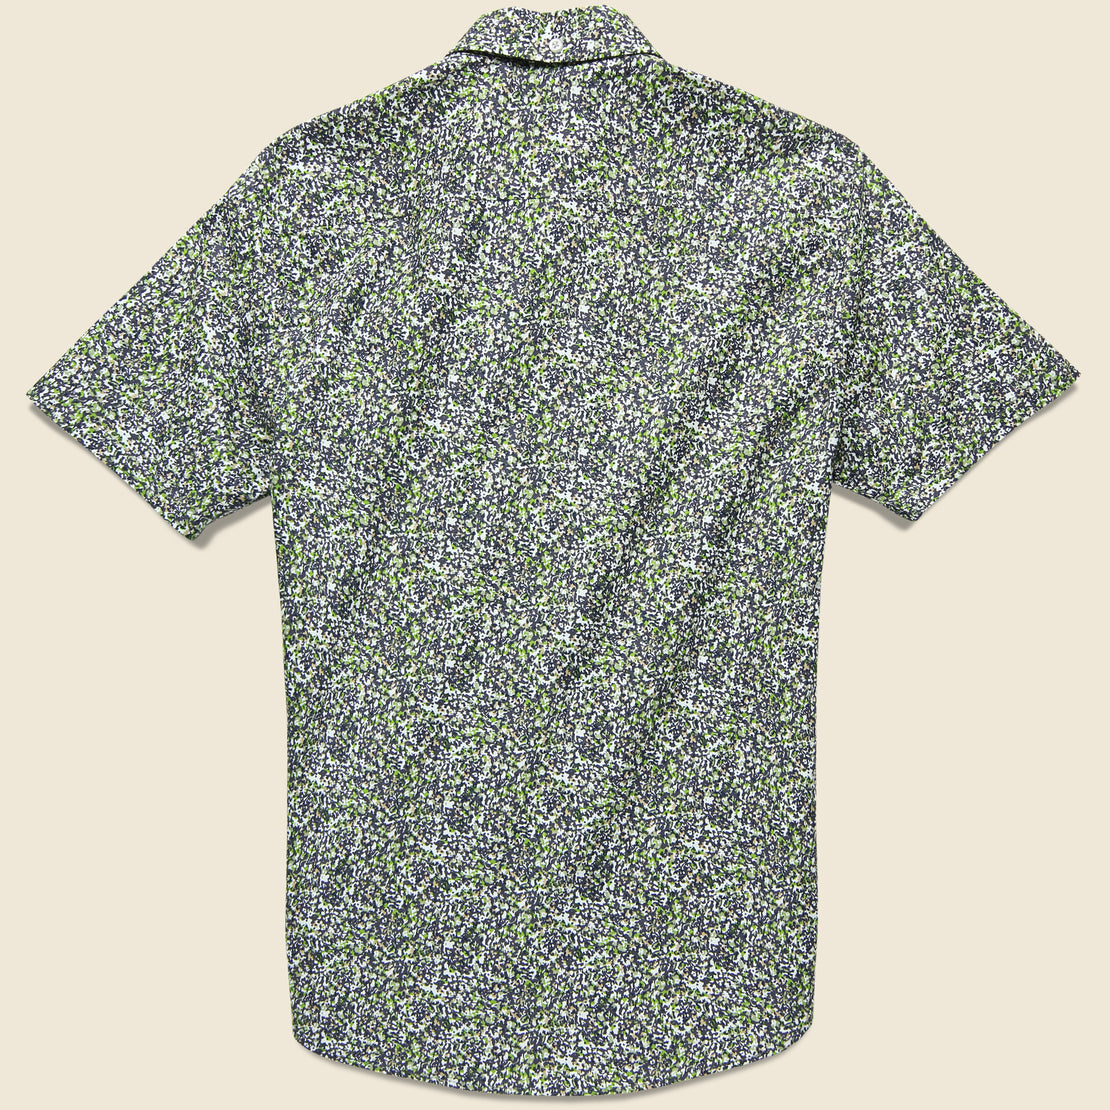 Tomah Shirt - Green - Penfield - STAG Provisions - Tops - S/S Woven - Floral